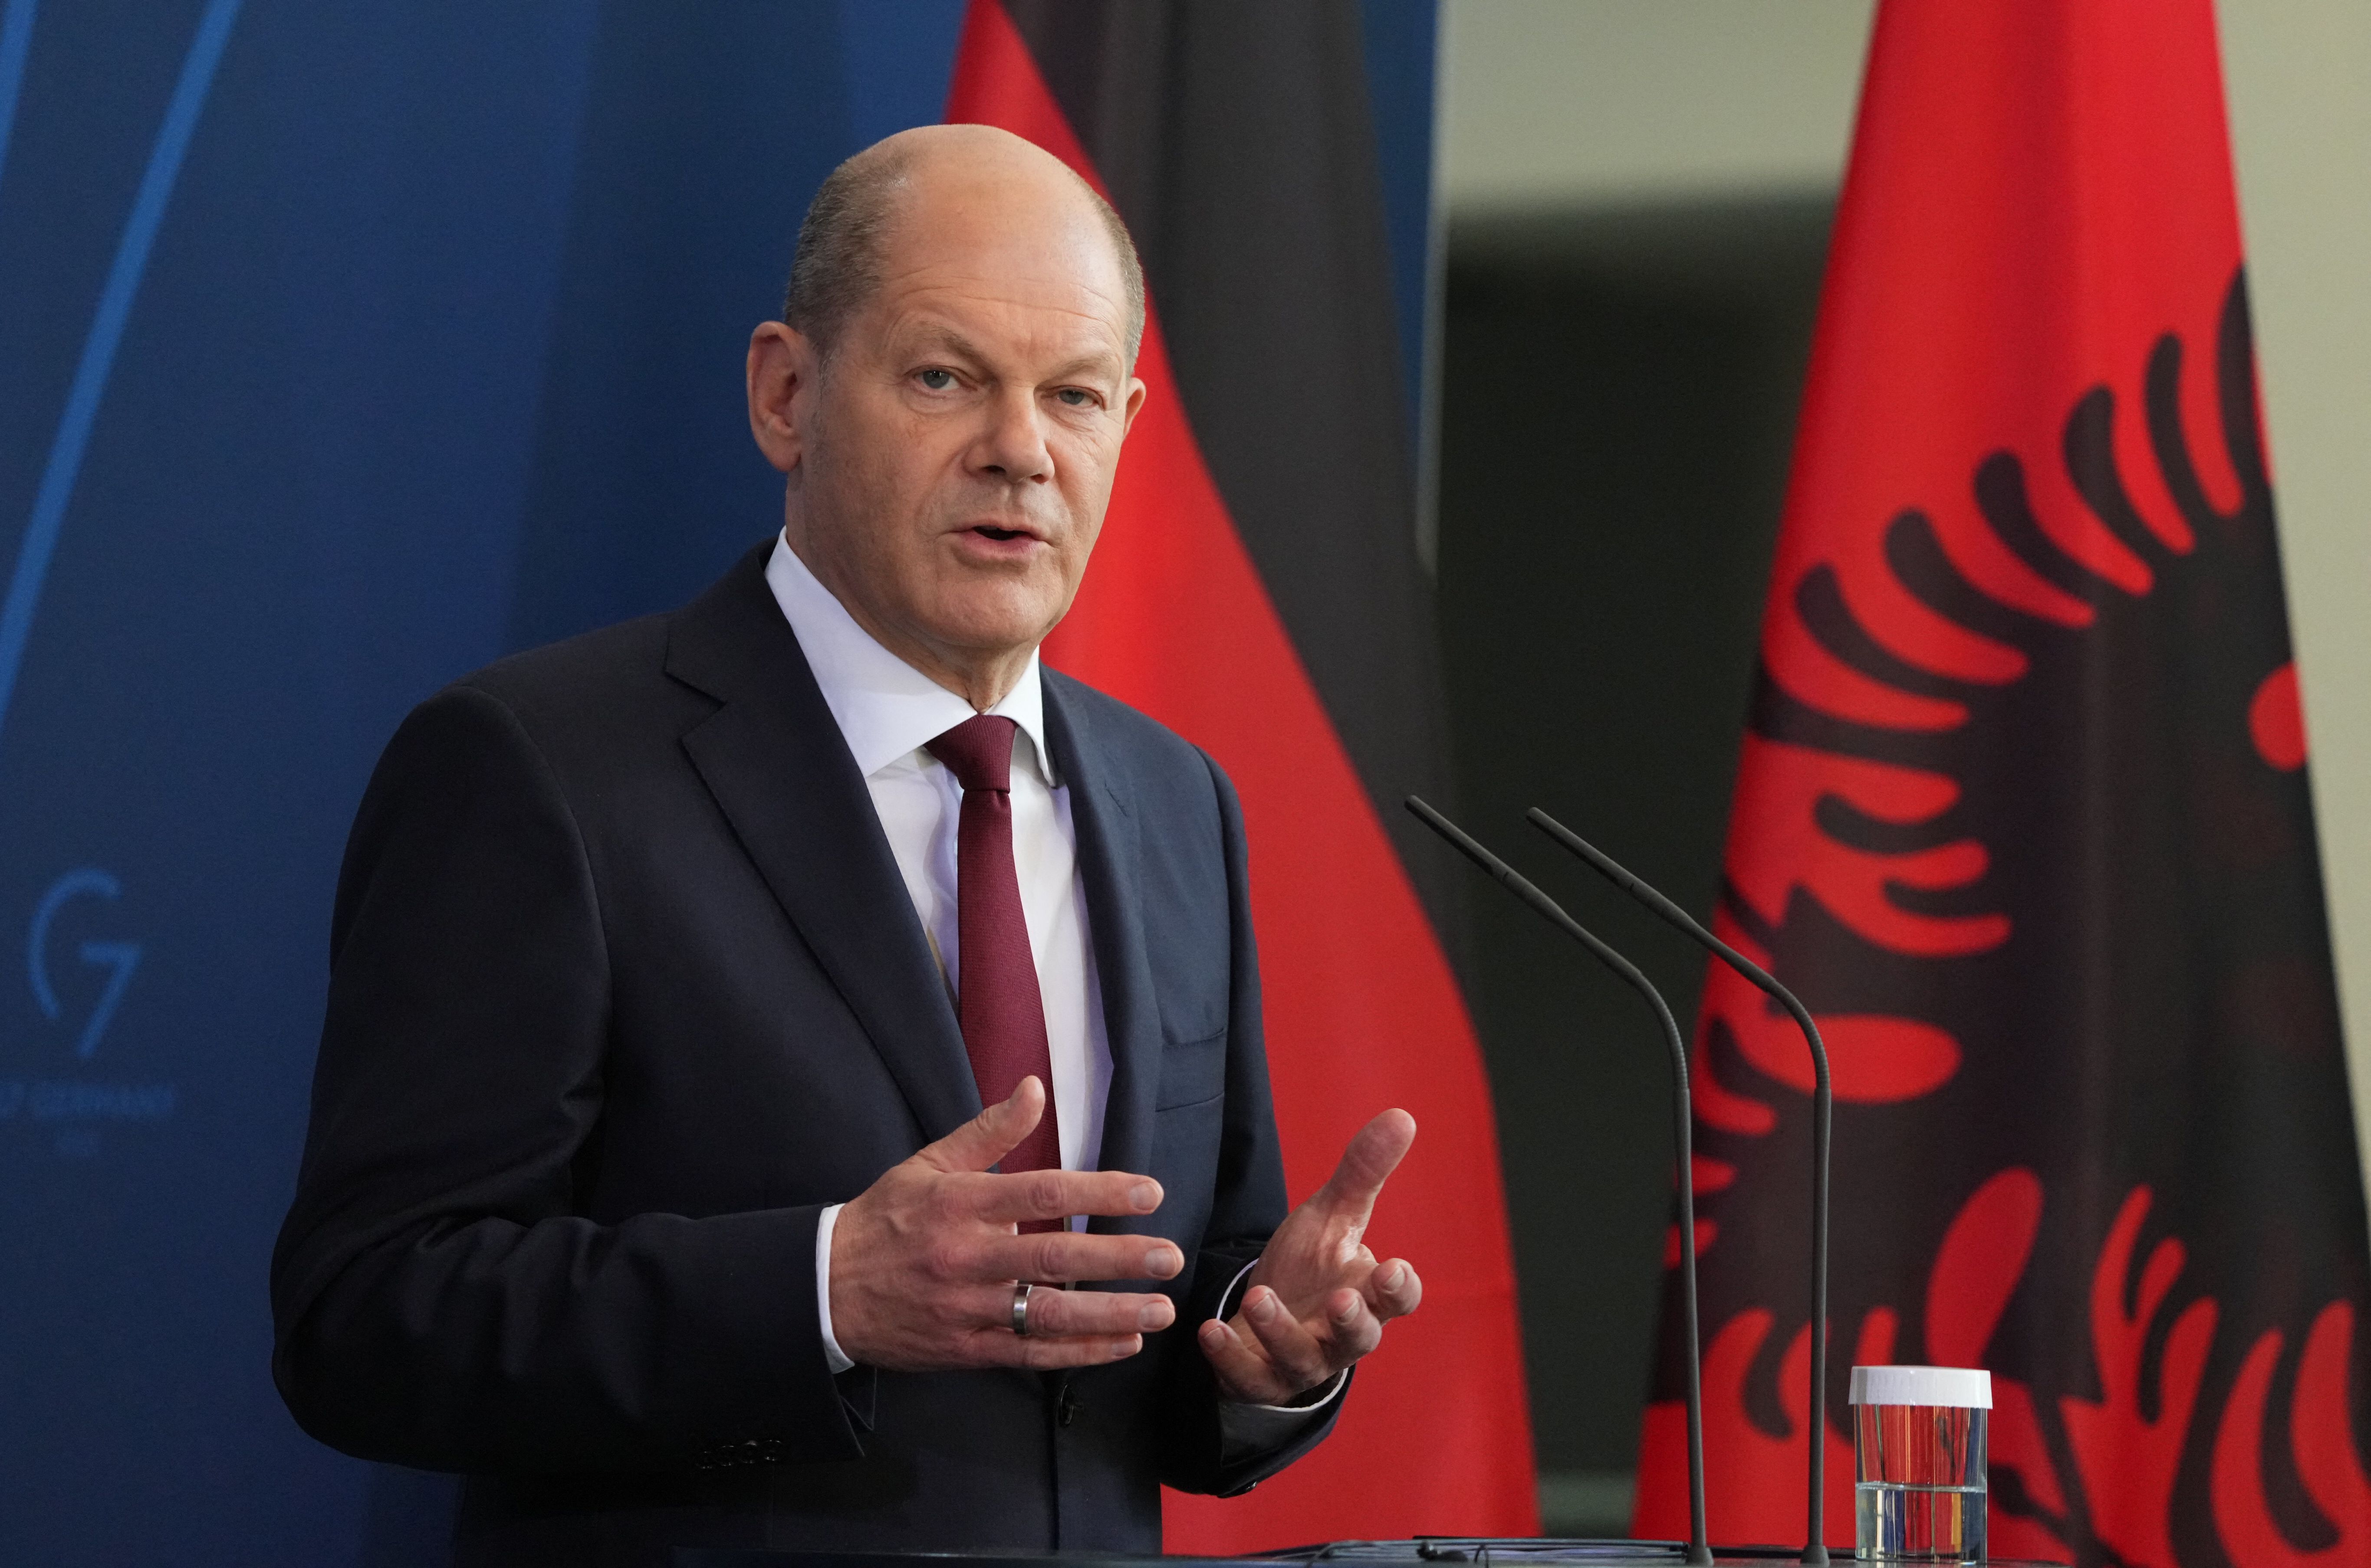 German Chancellor Olaf Scholz speaks at a press conference at the Chancellery in Berlin, Germany, on April 11.